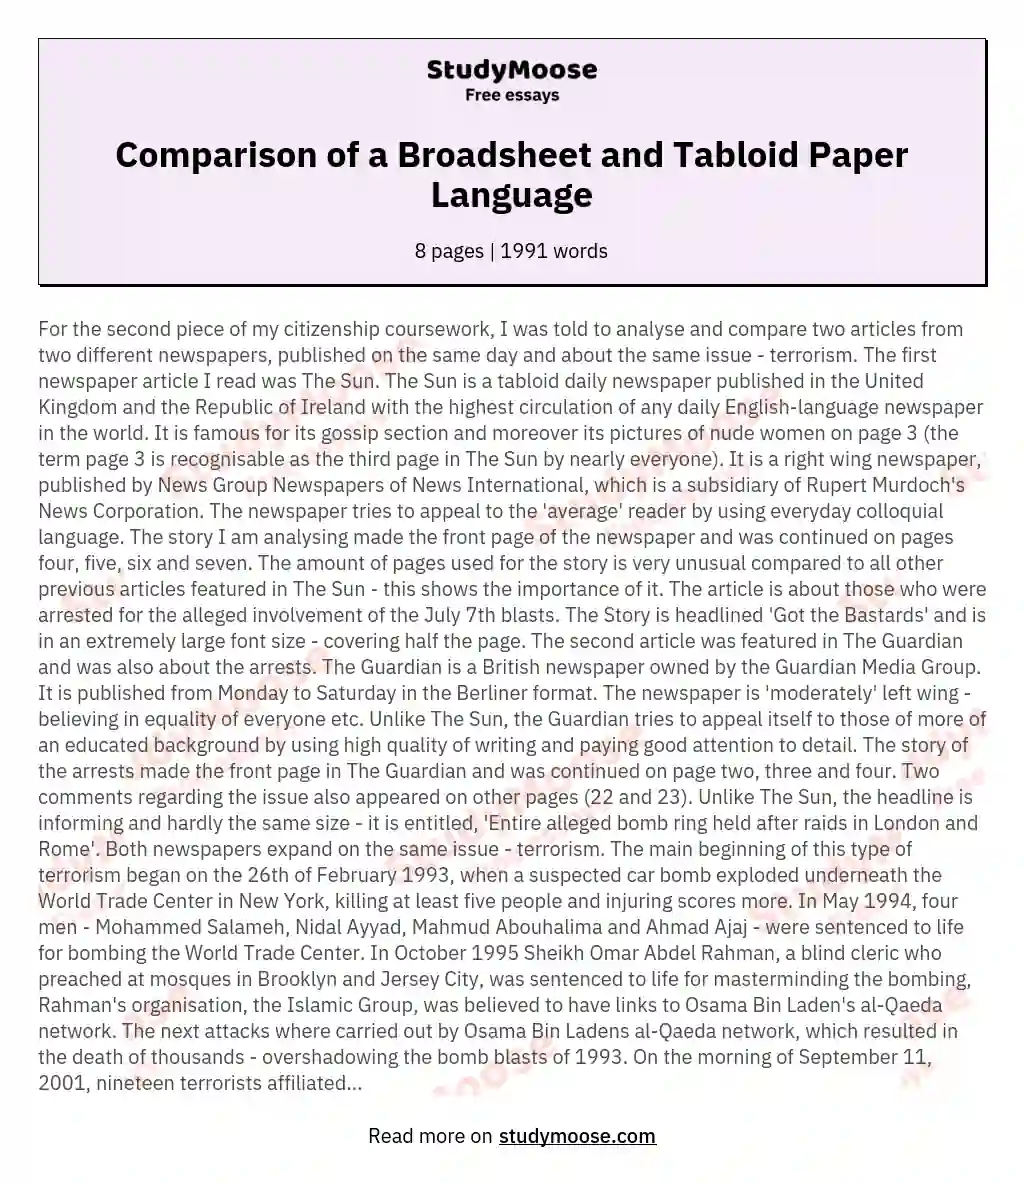 Comparison of a Broadsheet and Tabloid Paper Language